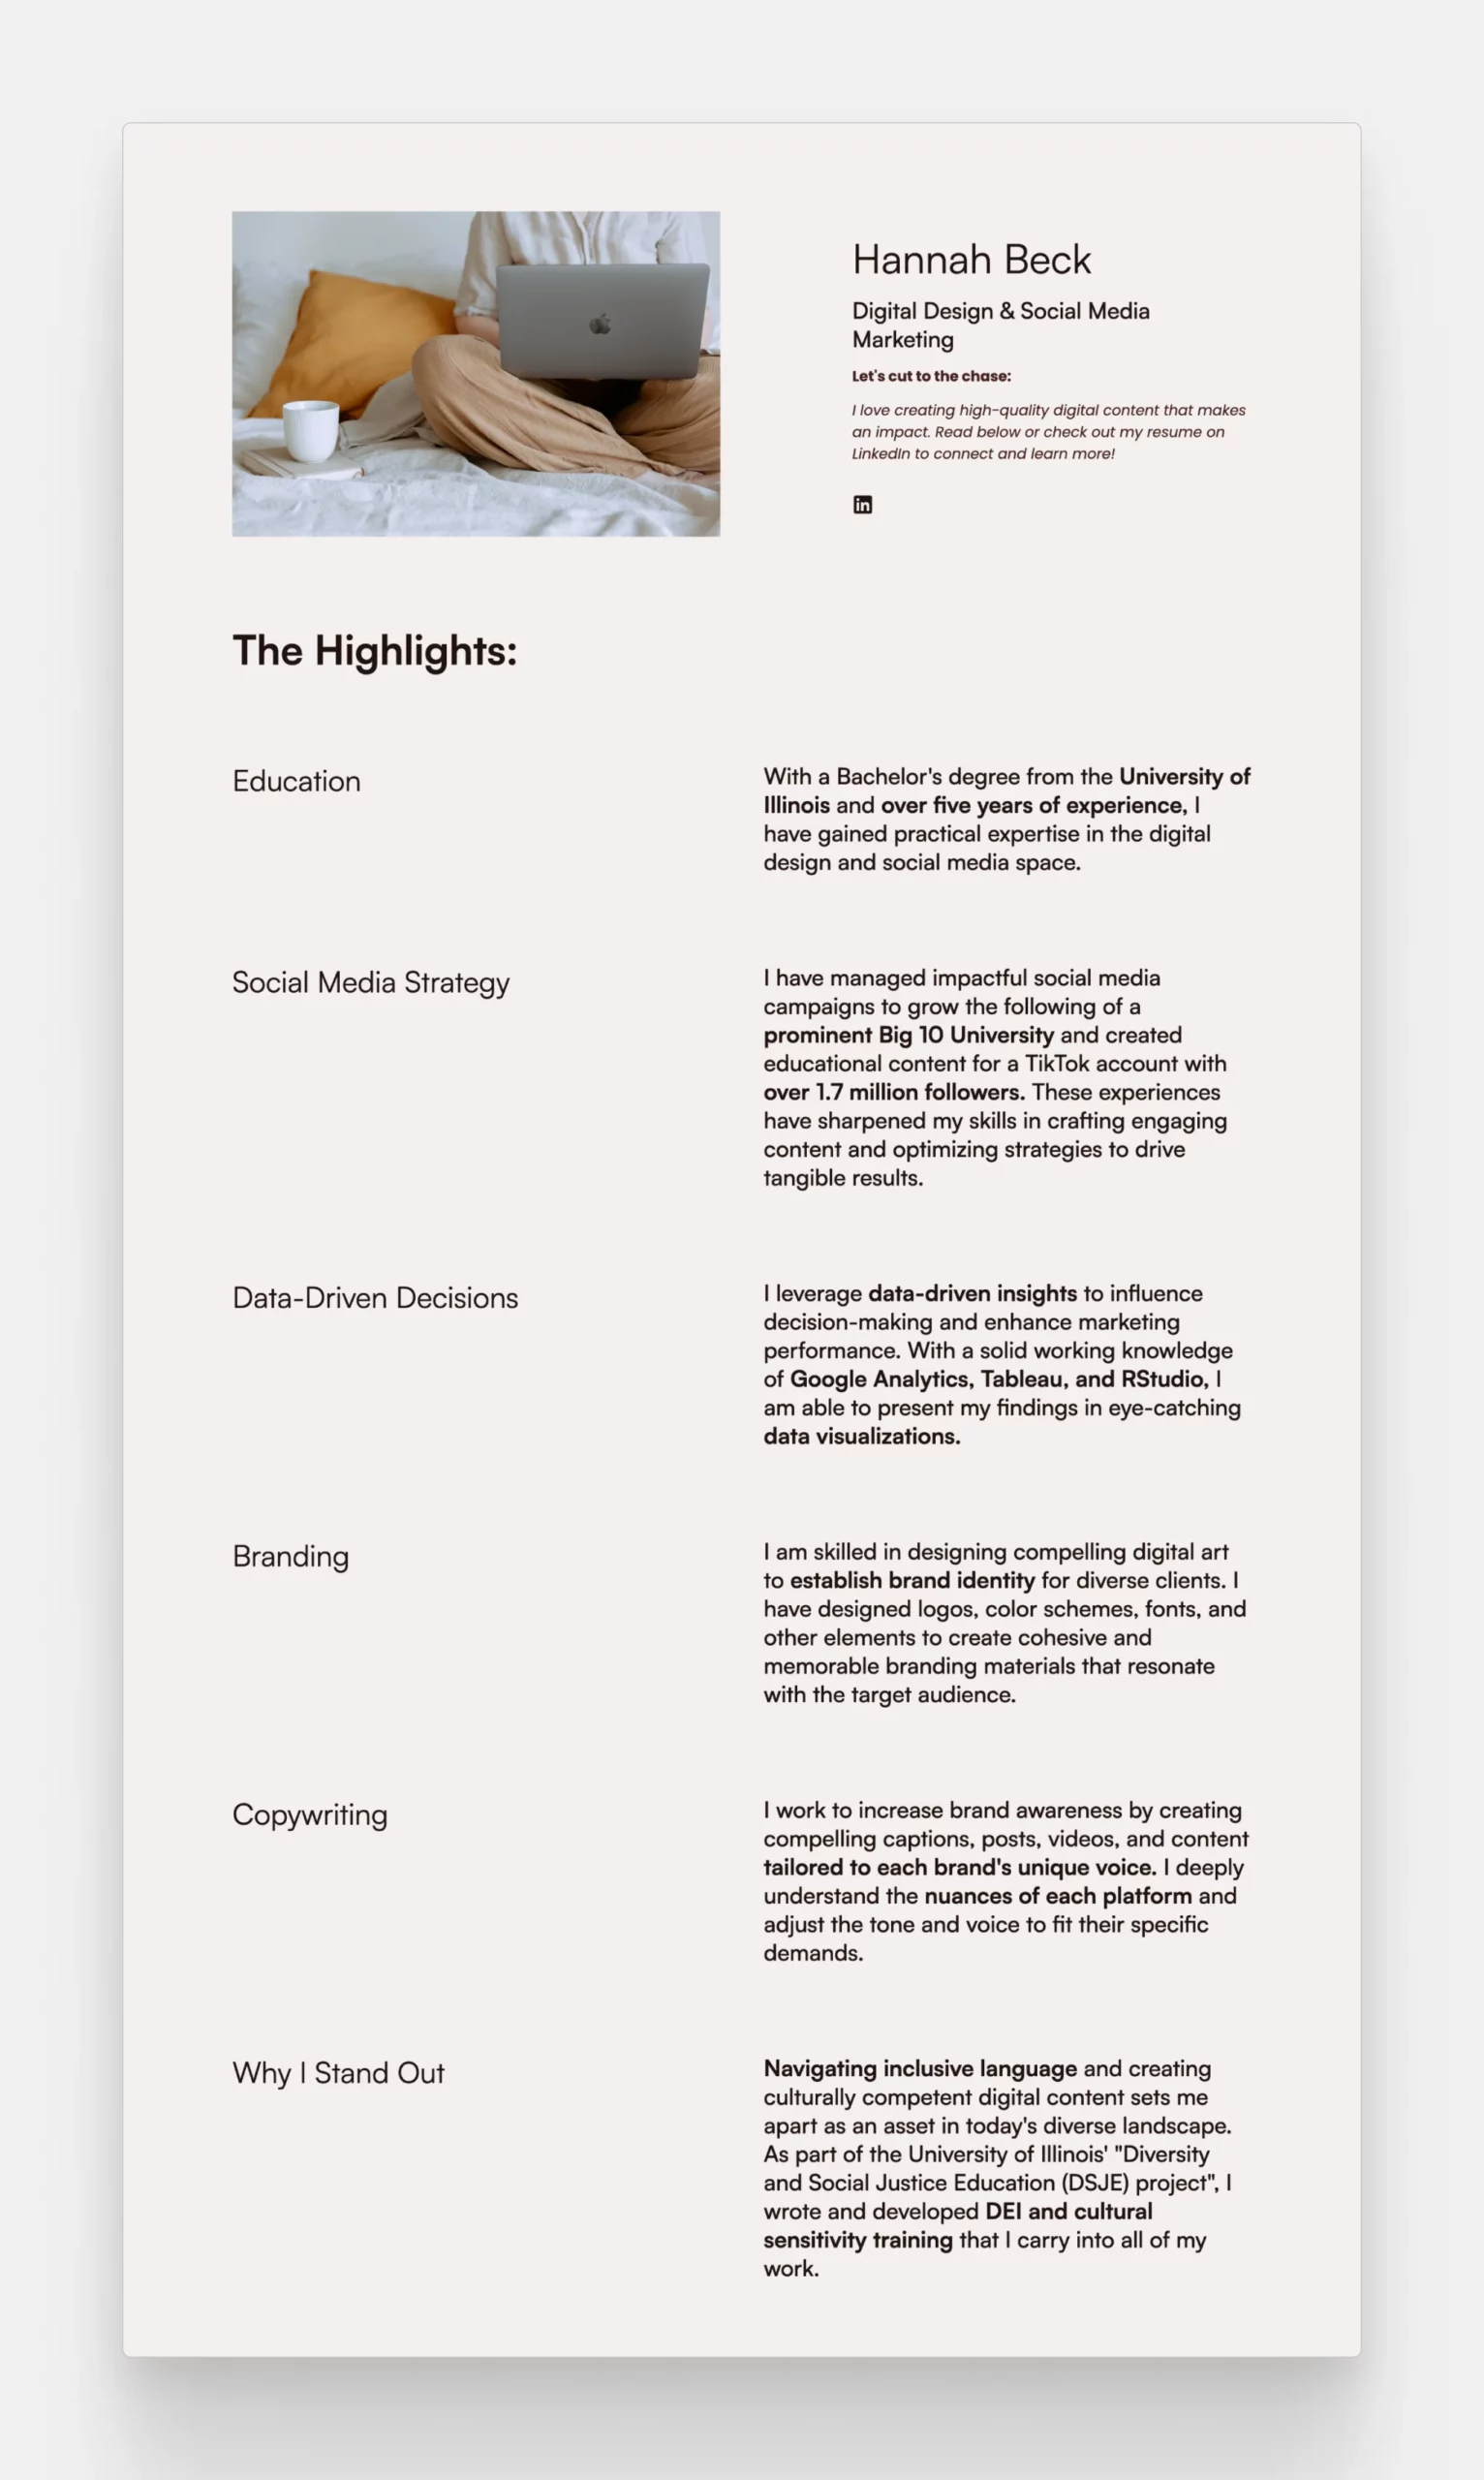 The about page on Hannah Beck social media marketer's website, where each section could act as a paragraph in a social media cover letter.